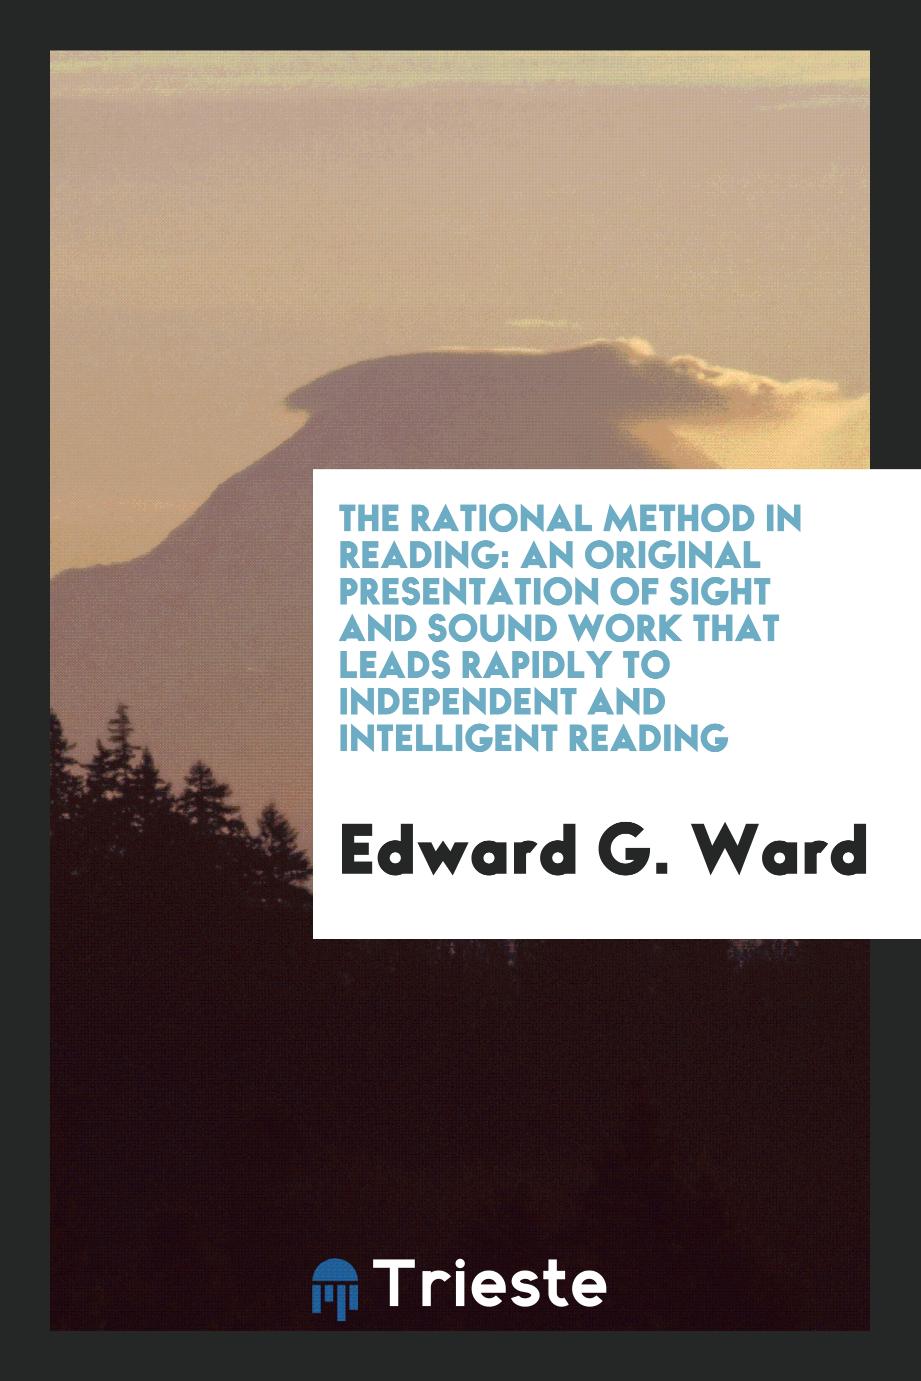 The Rational Method in Reading: An Original Presentation of Sight and Sound Work That Leads Rapidly to Independent and Intelligent Reading